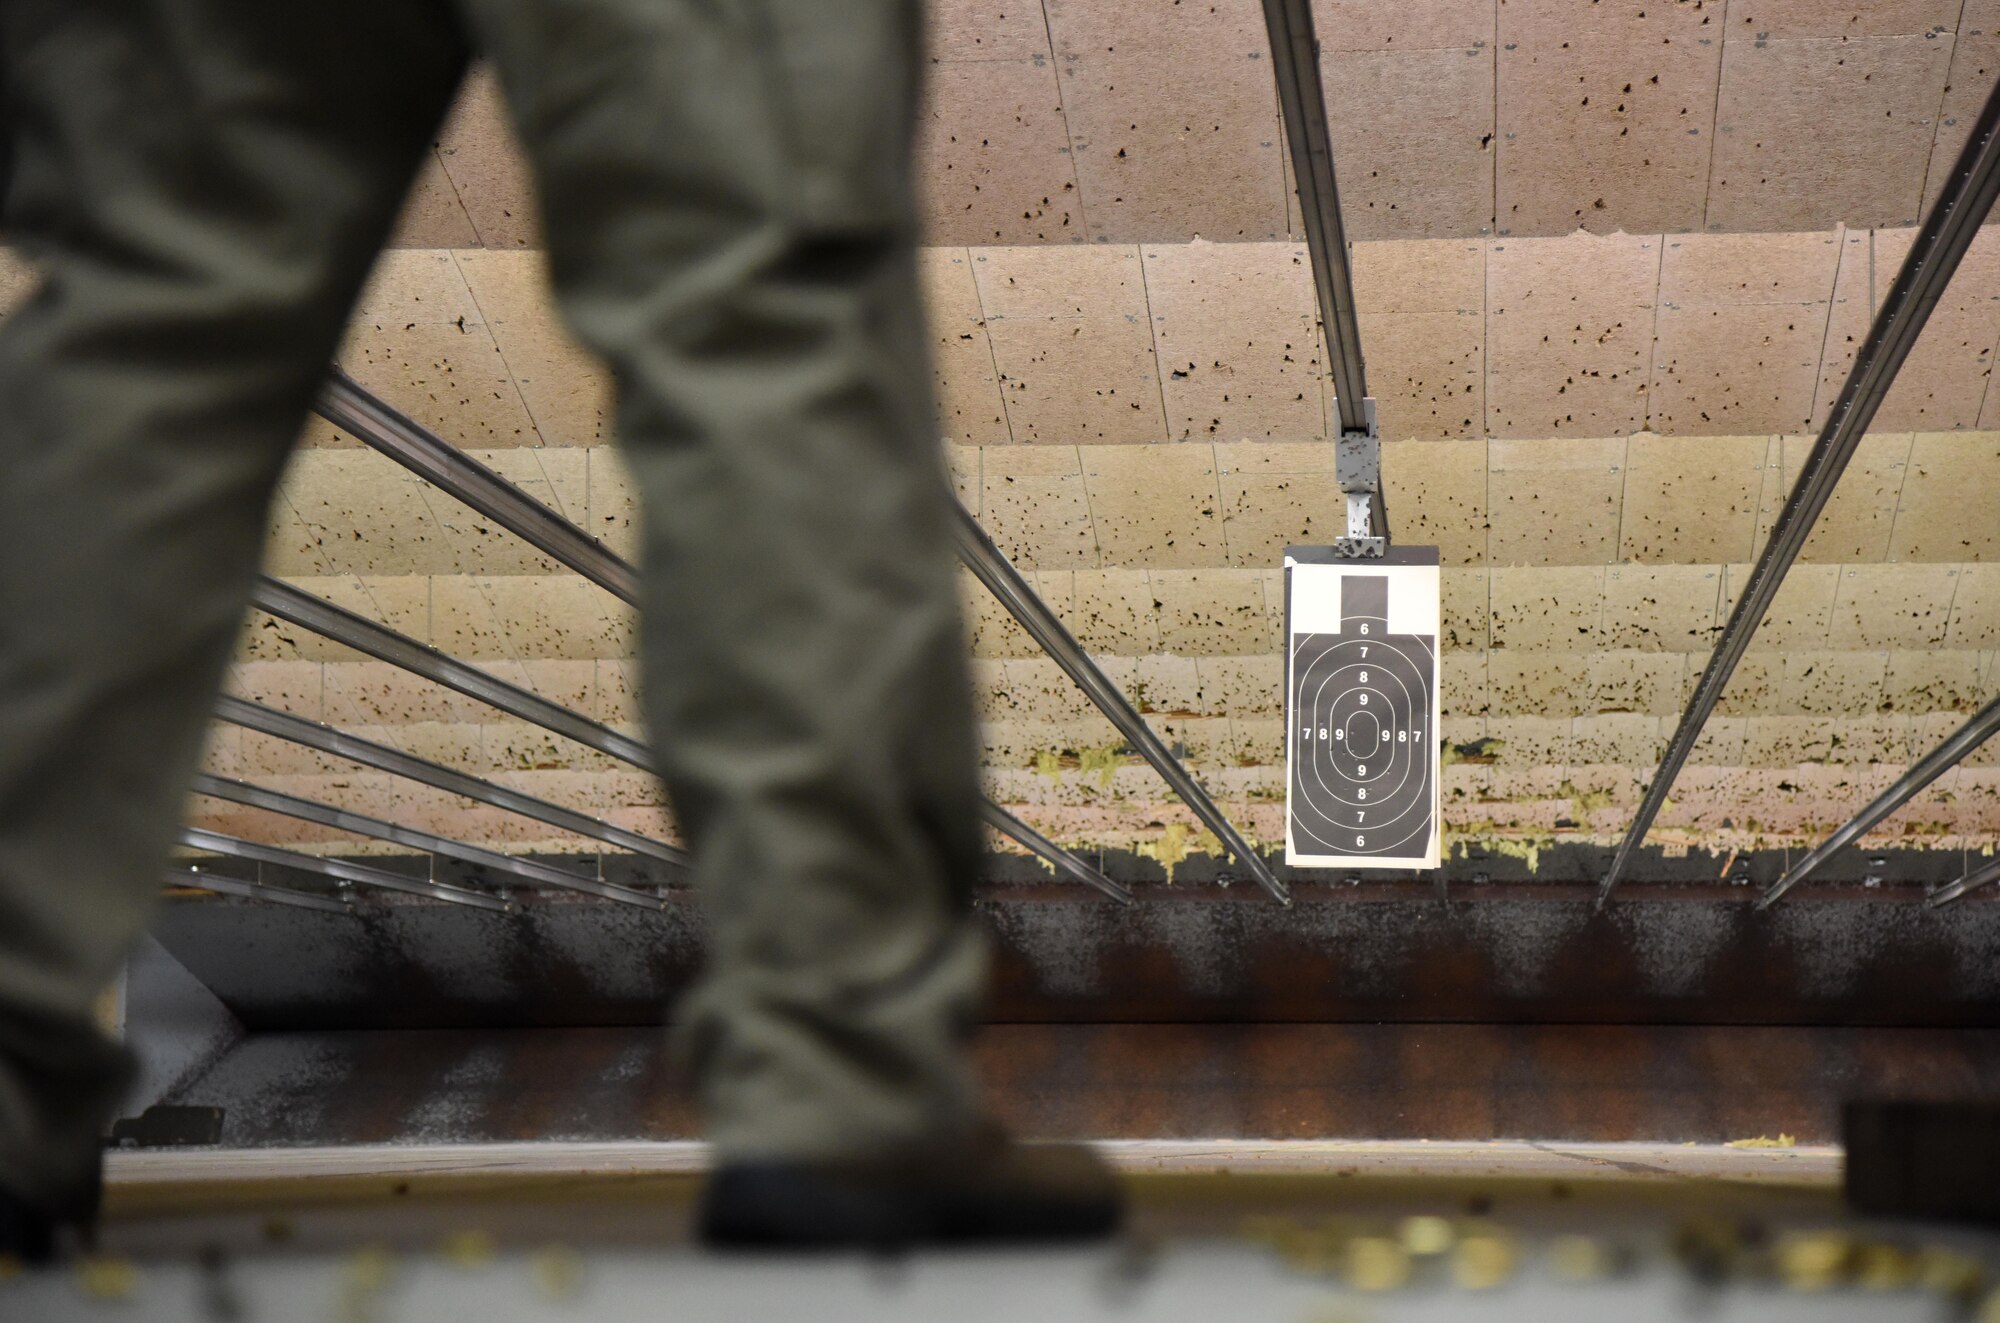 A silhouette shooting target hangs down range during the 81st Security Forces Squadron open base pistol shoot at the indoor firing range May 15, 2017, on Keesler Air Force Base, Miss. The event was held during National Police Week, which recognizes the service of law enforcement men and women who put their lives at risk every day. (U.S. Air Force photo by Kemberly Groue)